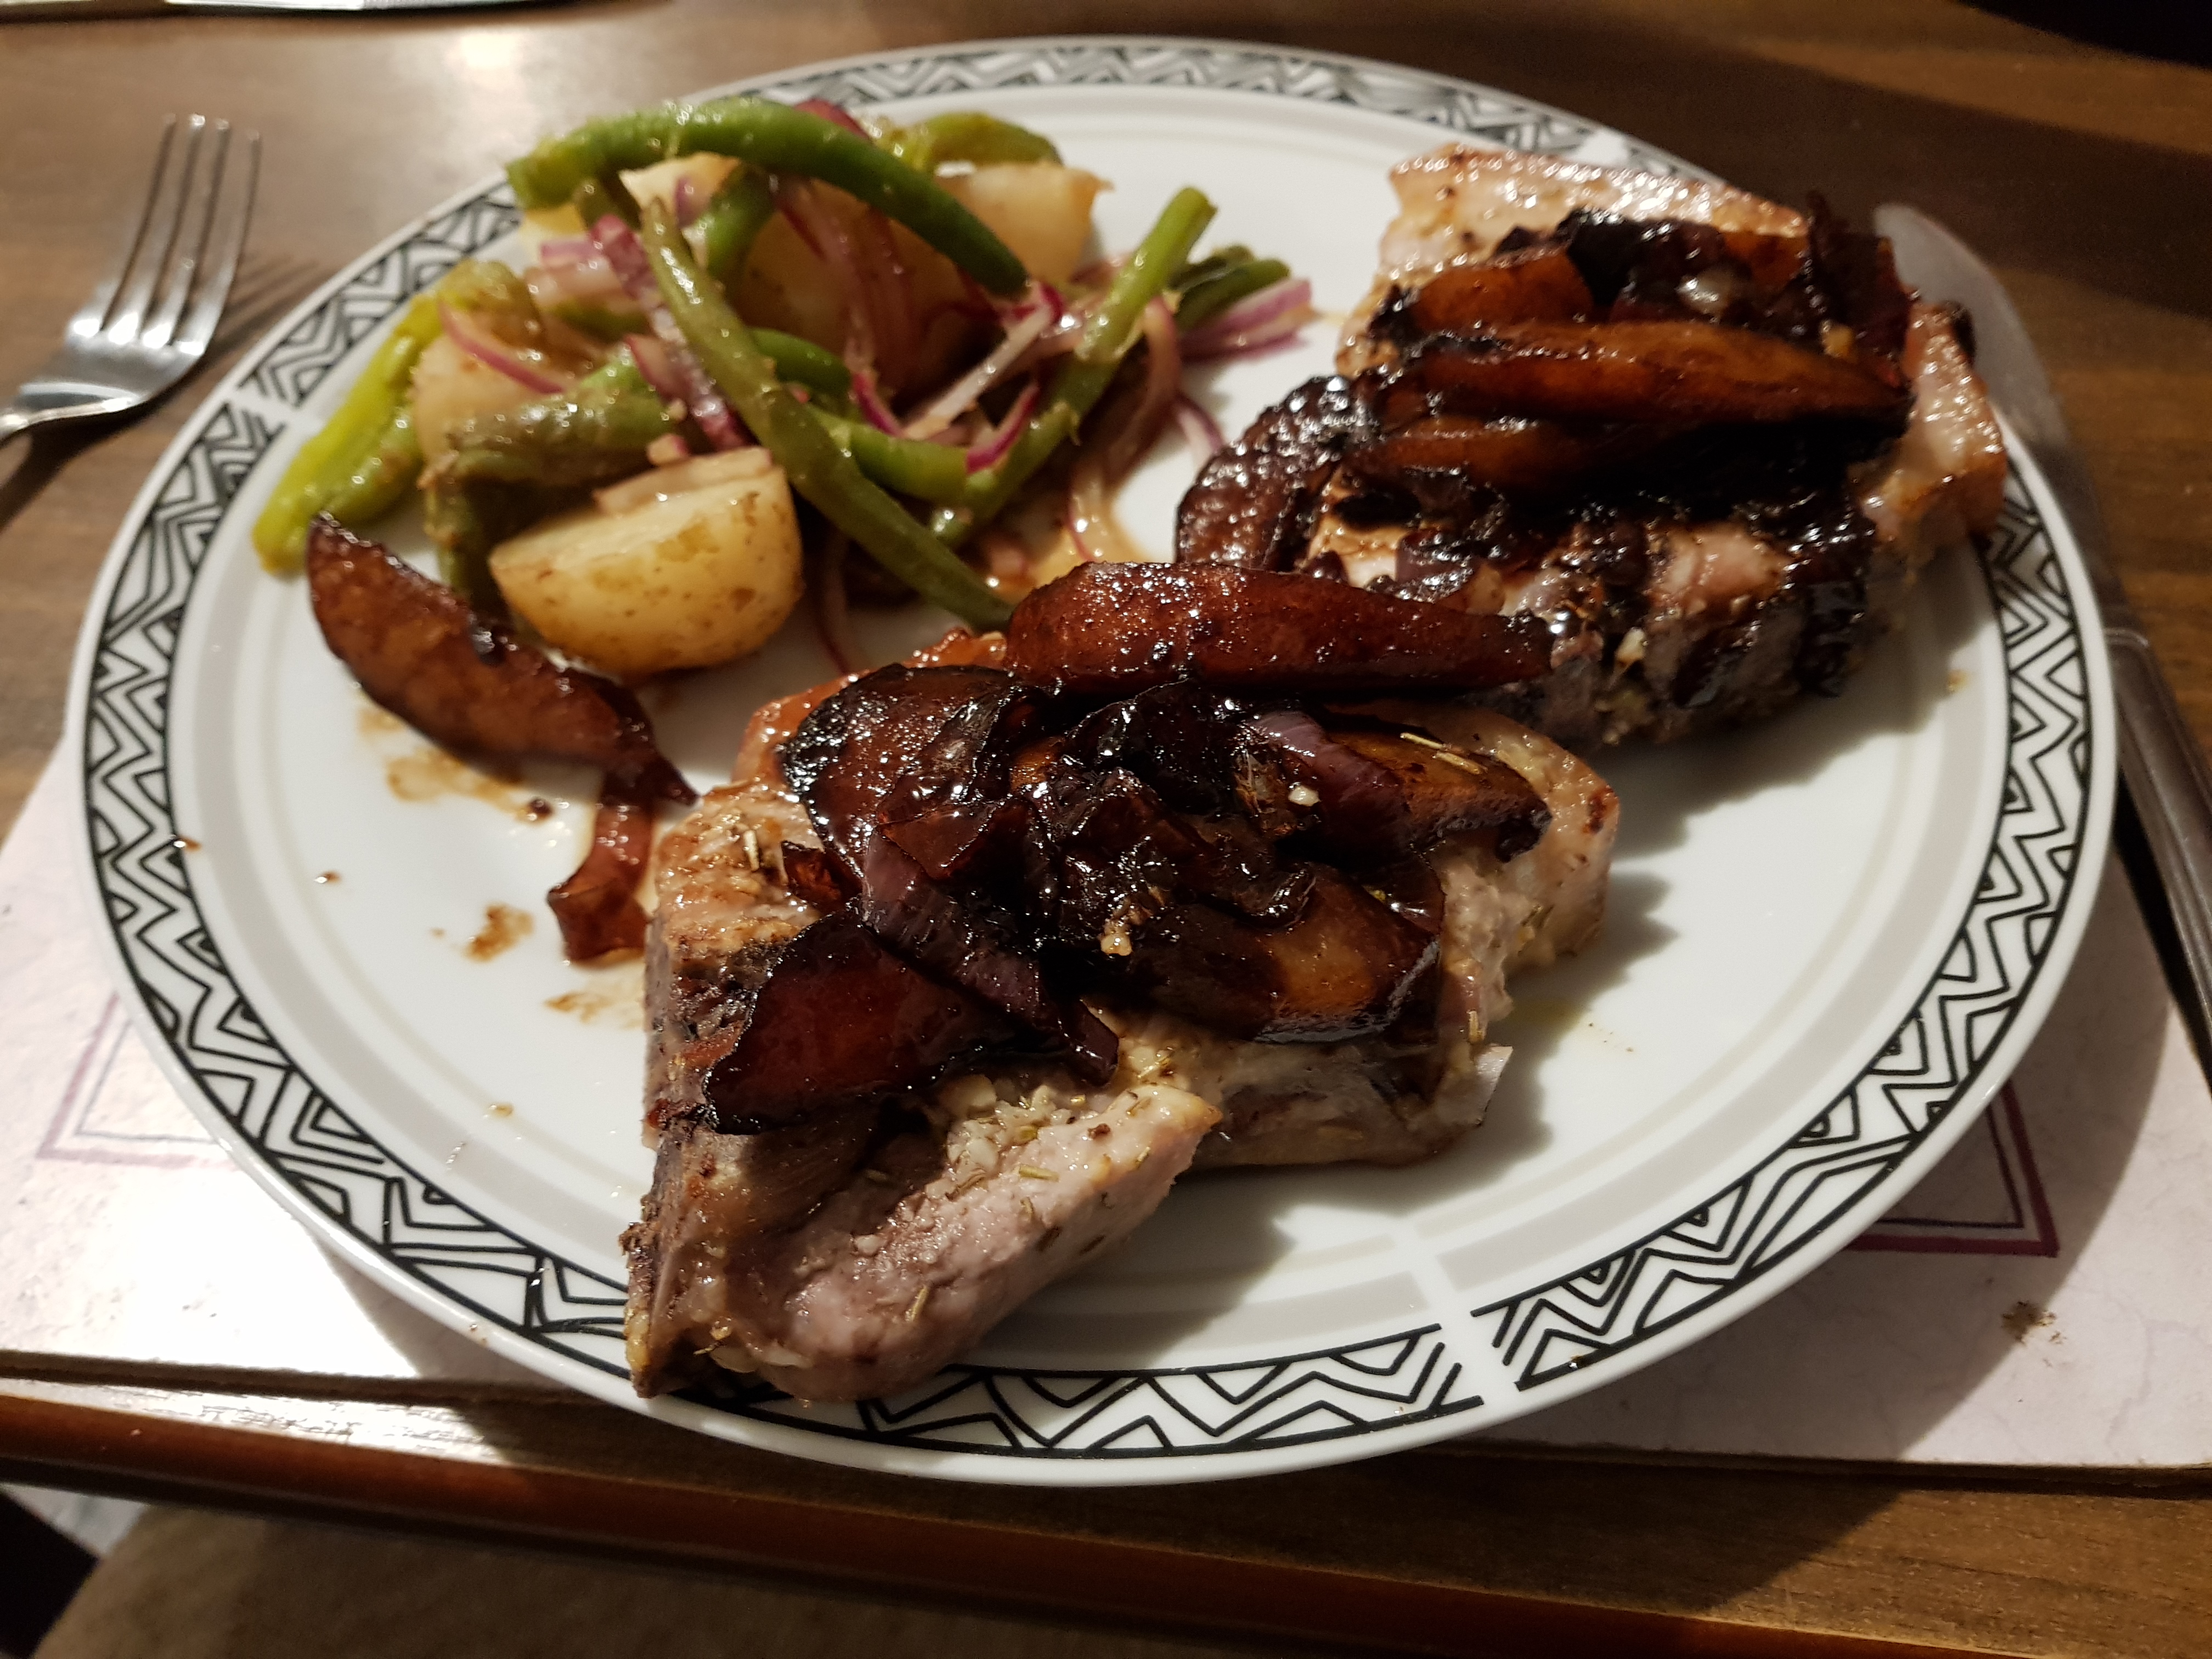 Grilled Pork Chops with Balsamic Caramelized Pears Dave Fine